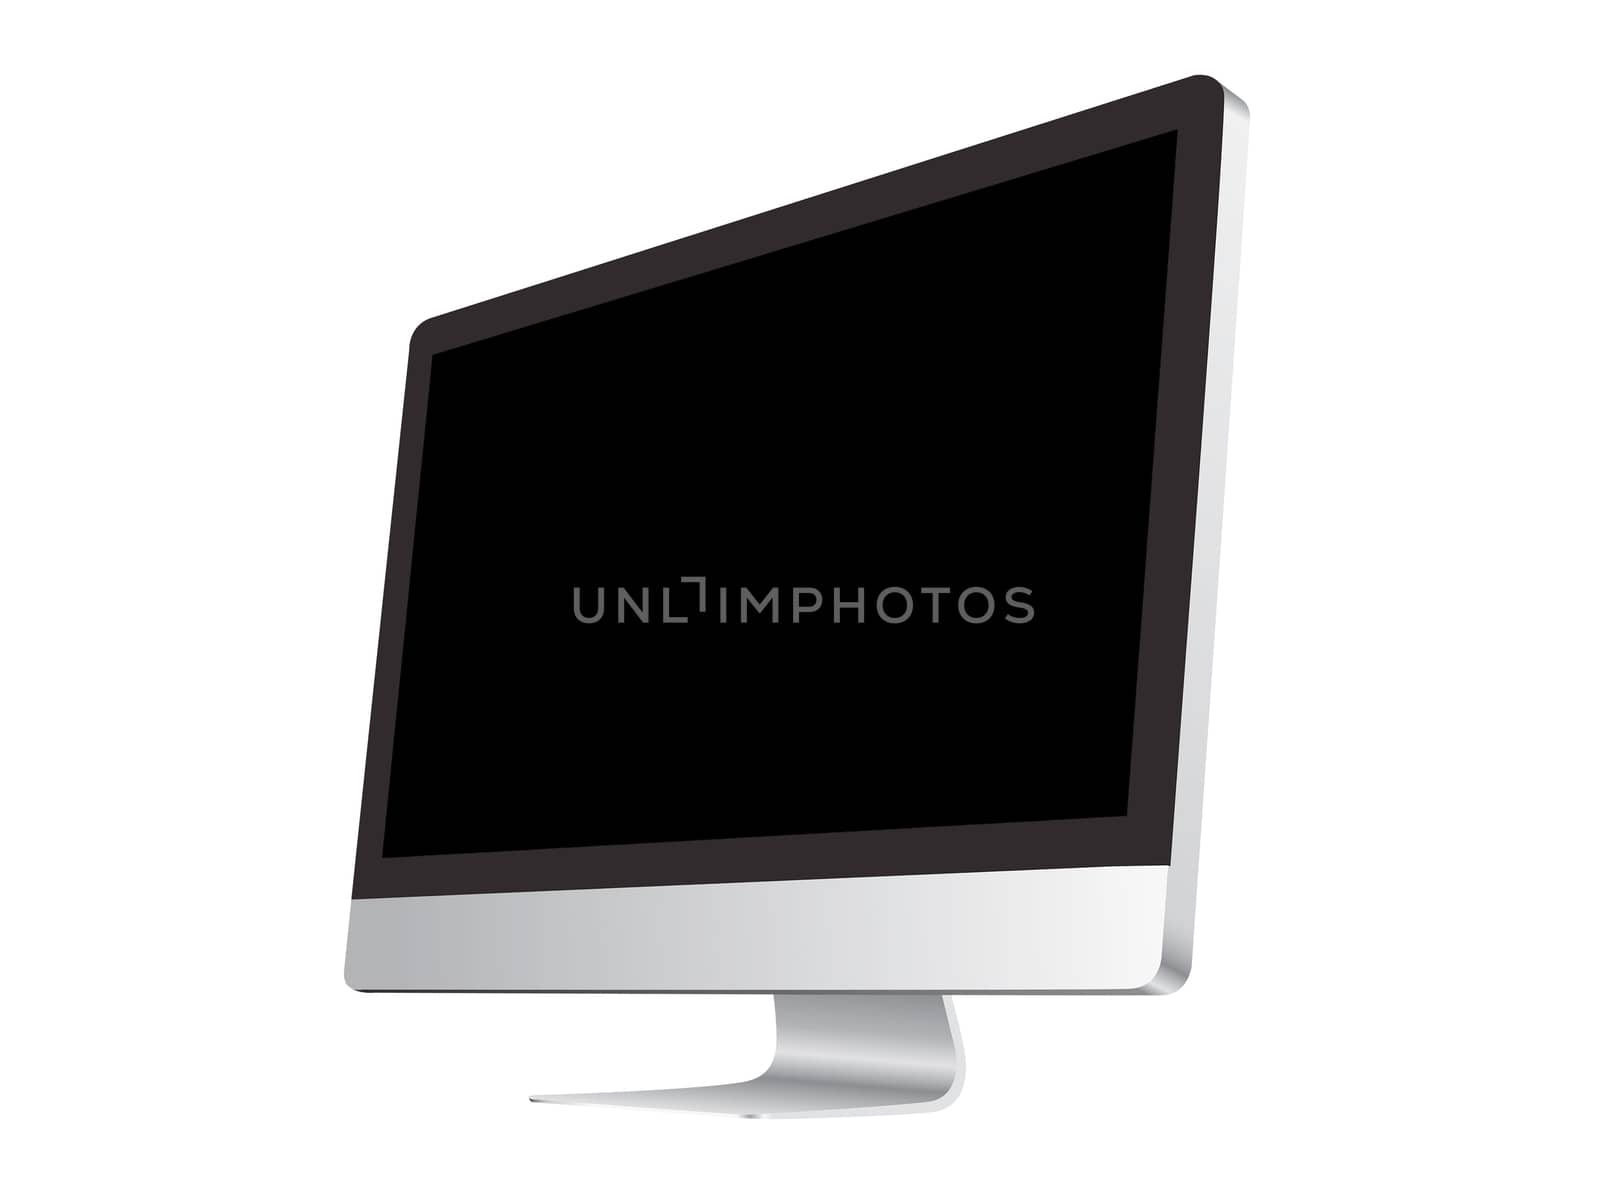 Isolated Computer black screen on white blackground by cougarsan